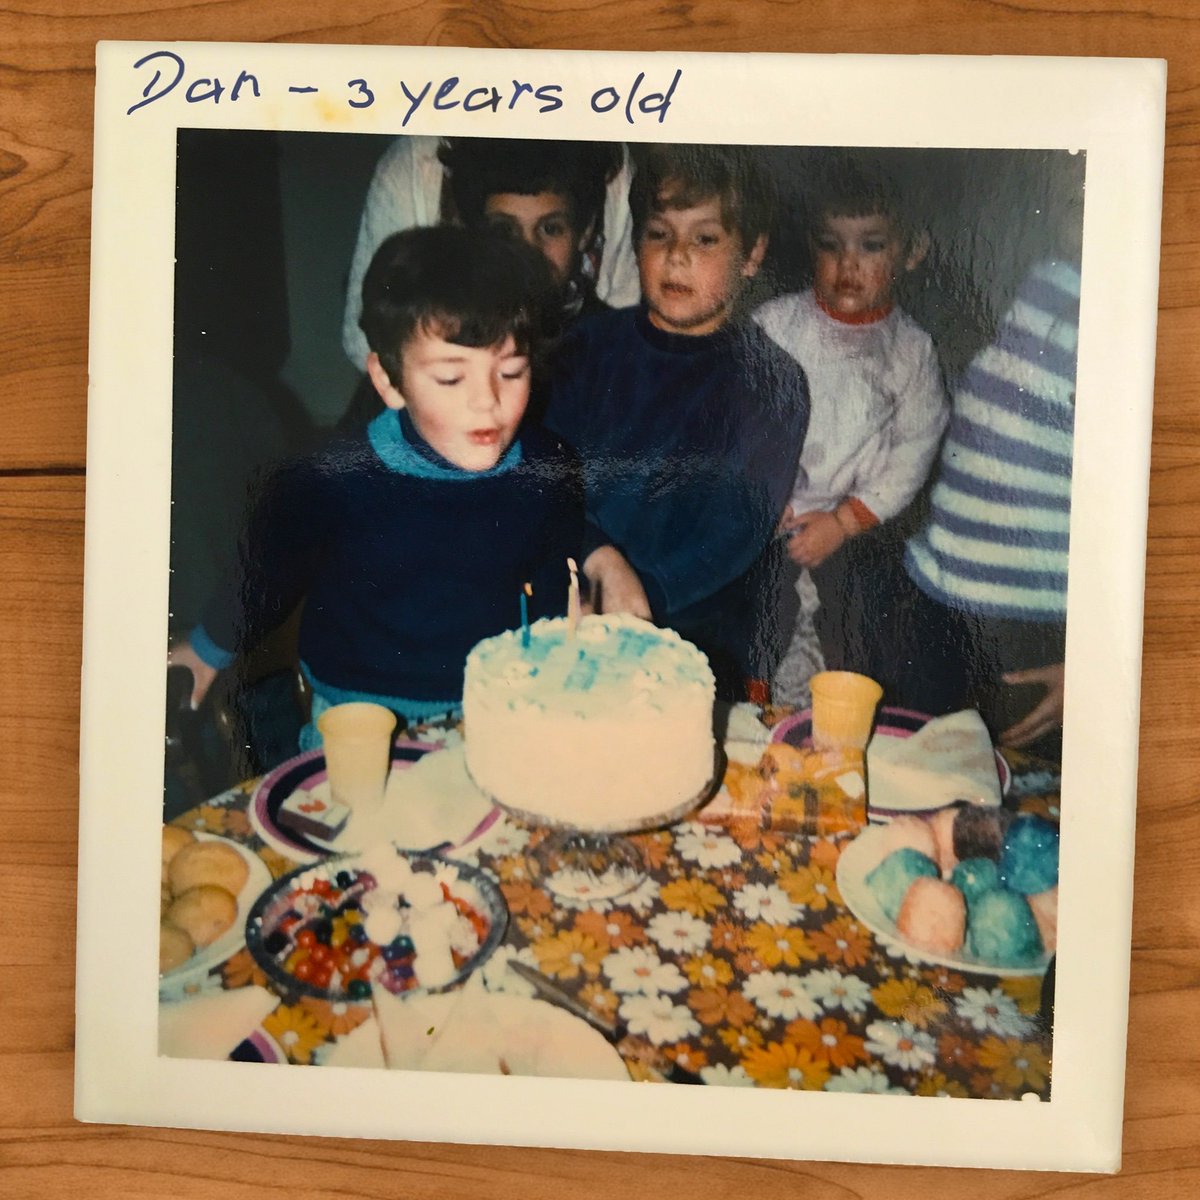 Dan Andrews: It’s been a few years since I turned three, and I can’t quite rem…